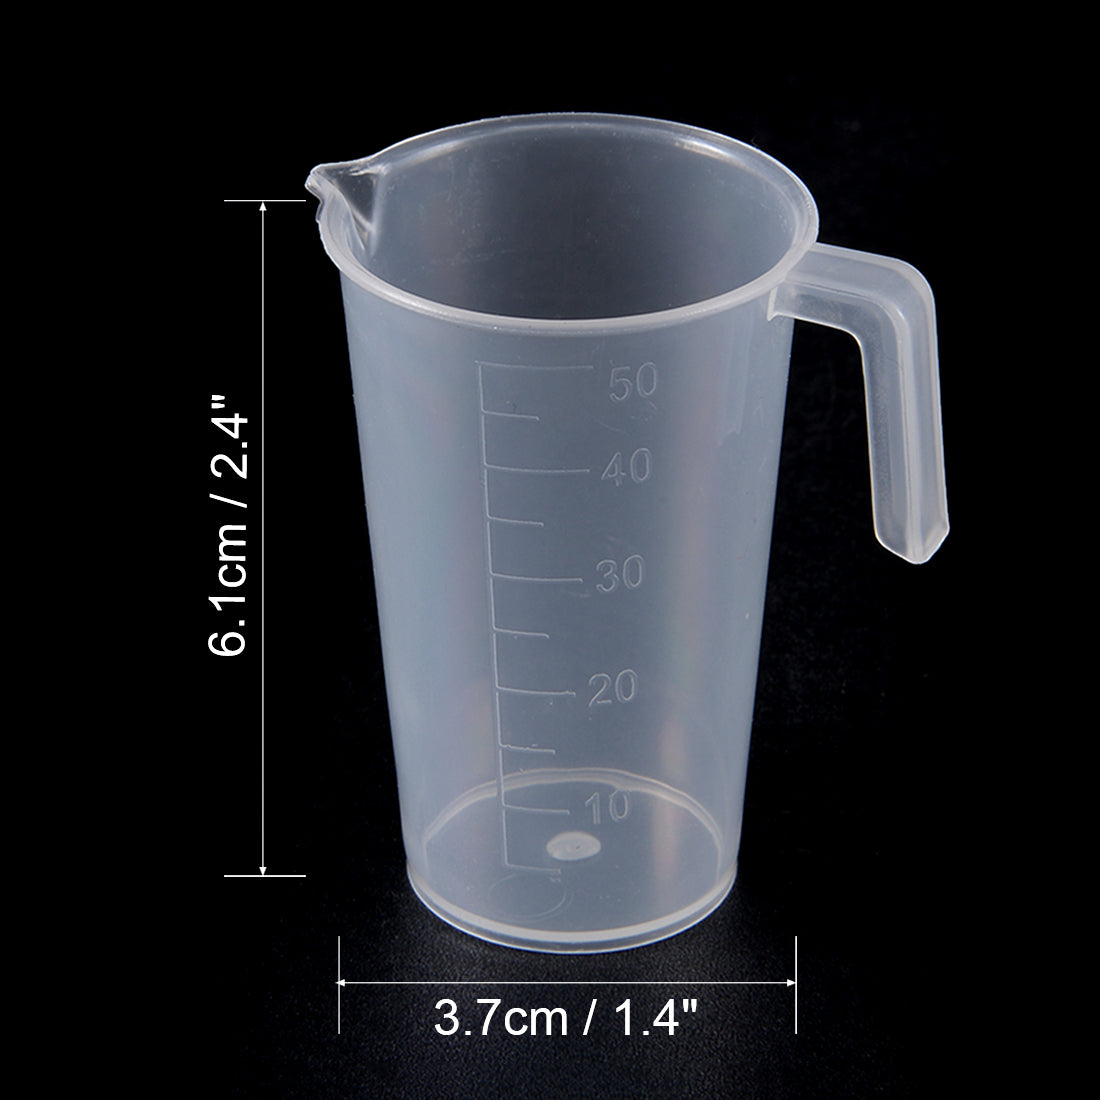 uxcell Uxcell 4pcs Laboratory Clear White PP 50mL Measuring Cup Handled Beaker